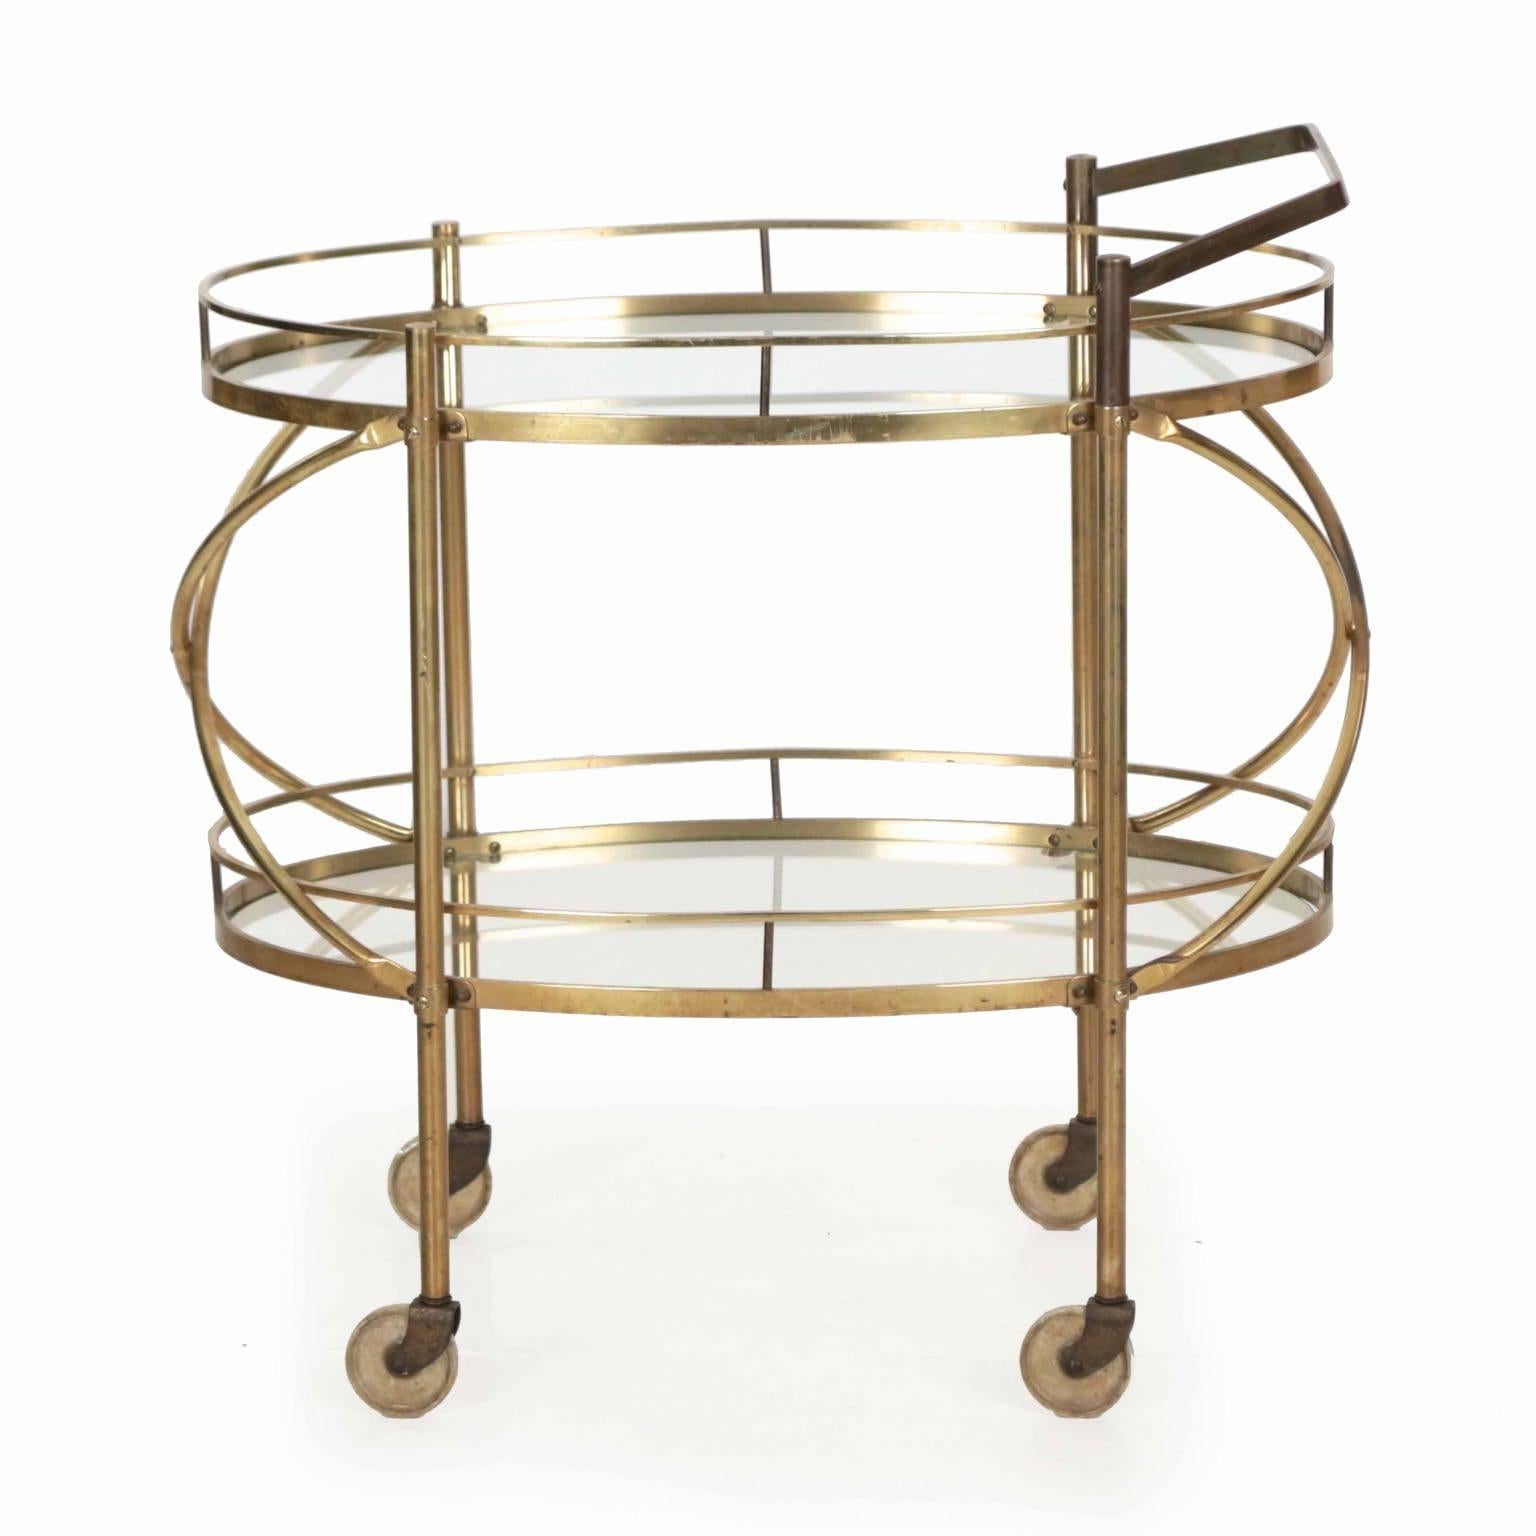 A very nice brass and glass serving bar cart from the 1960s with precise and high quality metal work throughout, the form is unsigned but very similar to some of the pieces by Maxwell Phillips of New York, though generally without the bent tubular